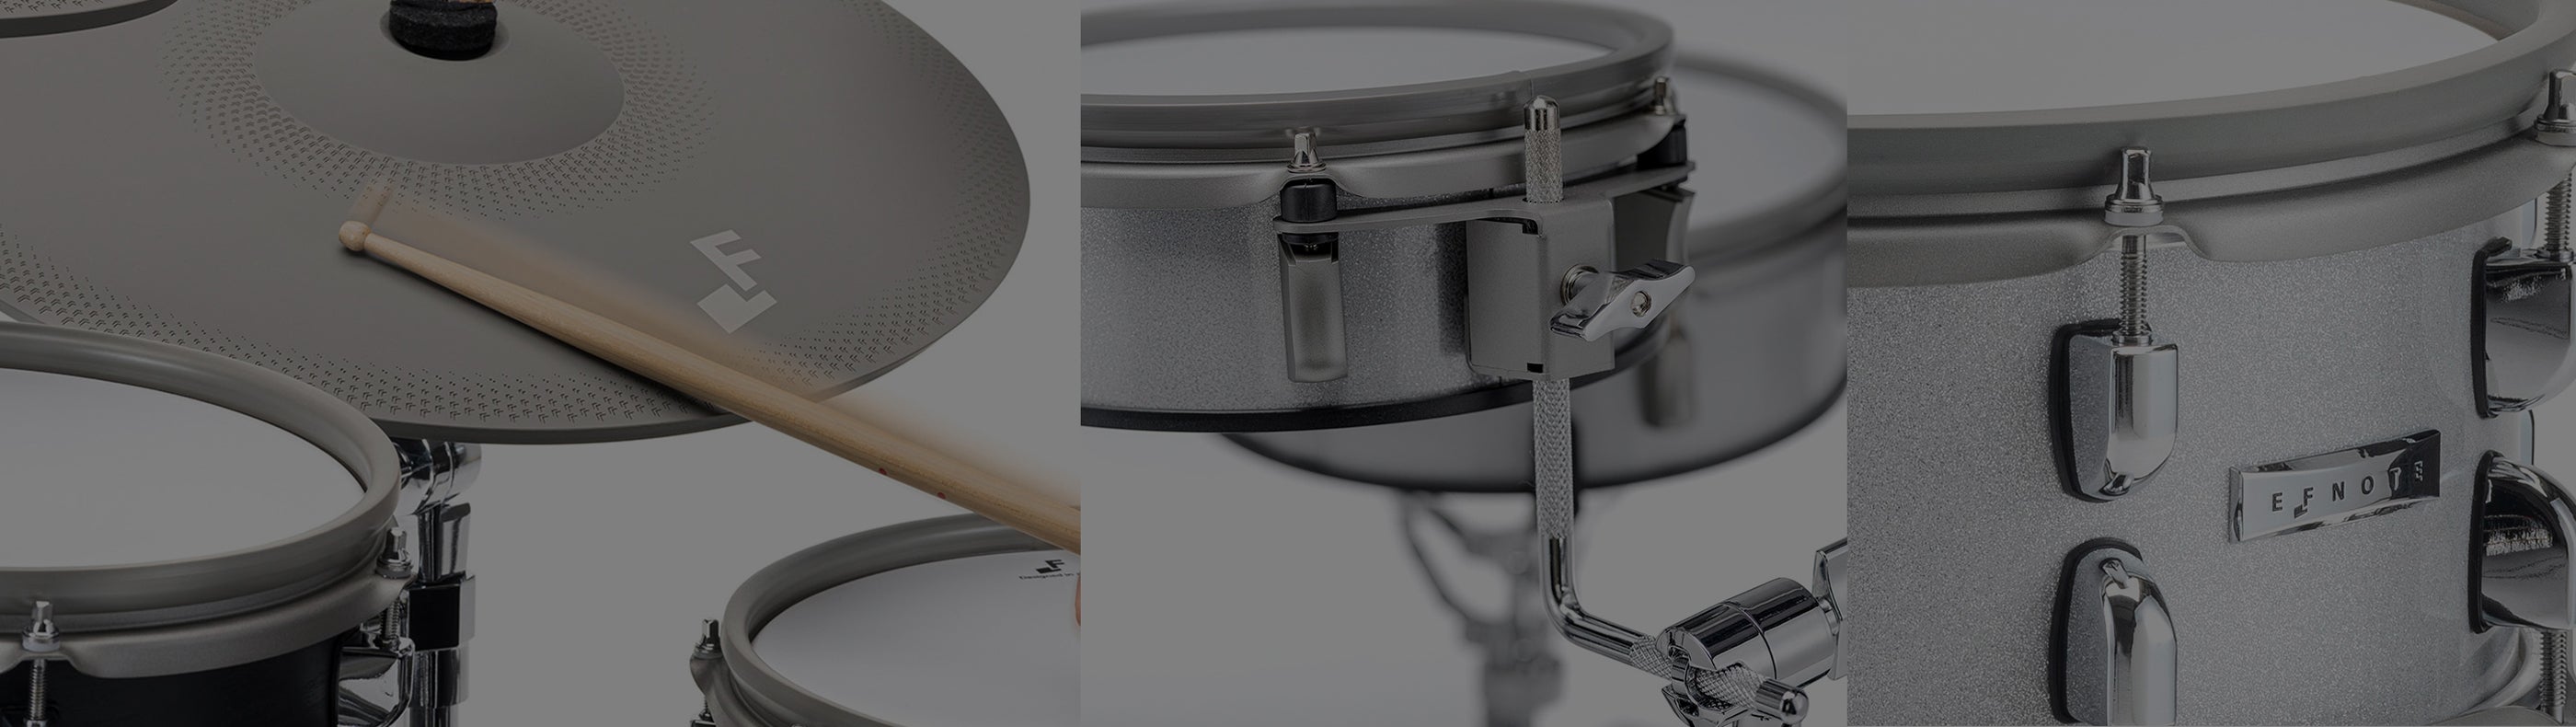 EFNOTE Cymbals, Pads & Components